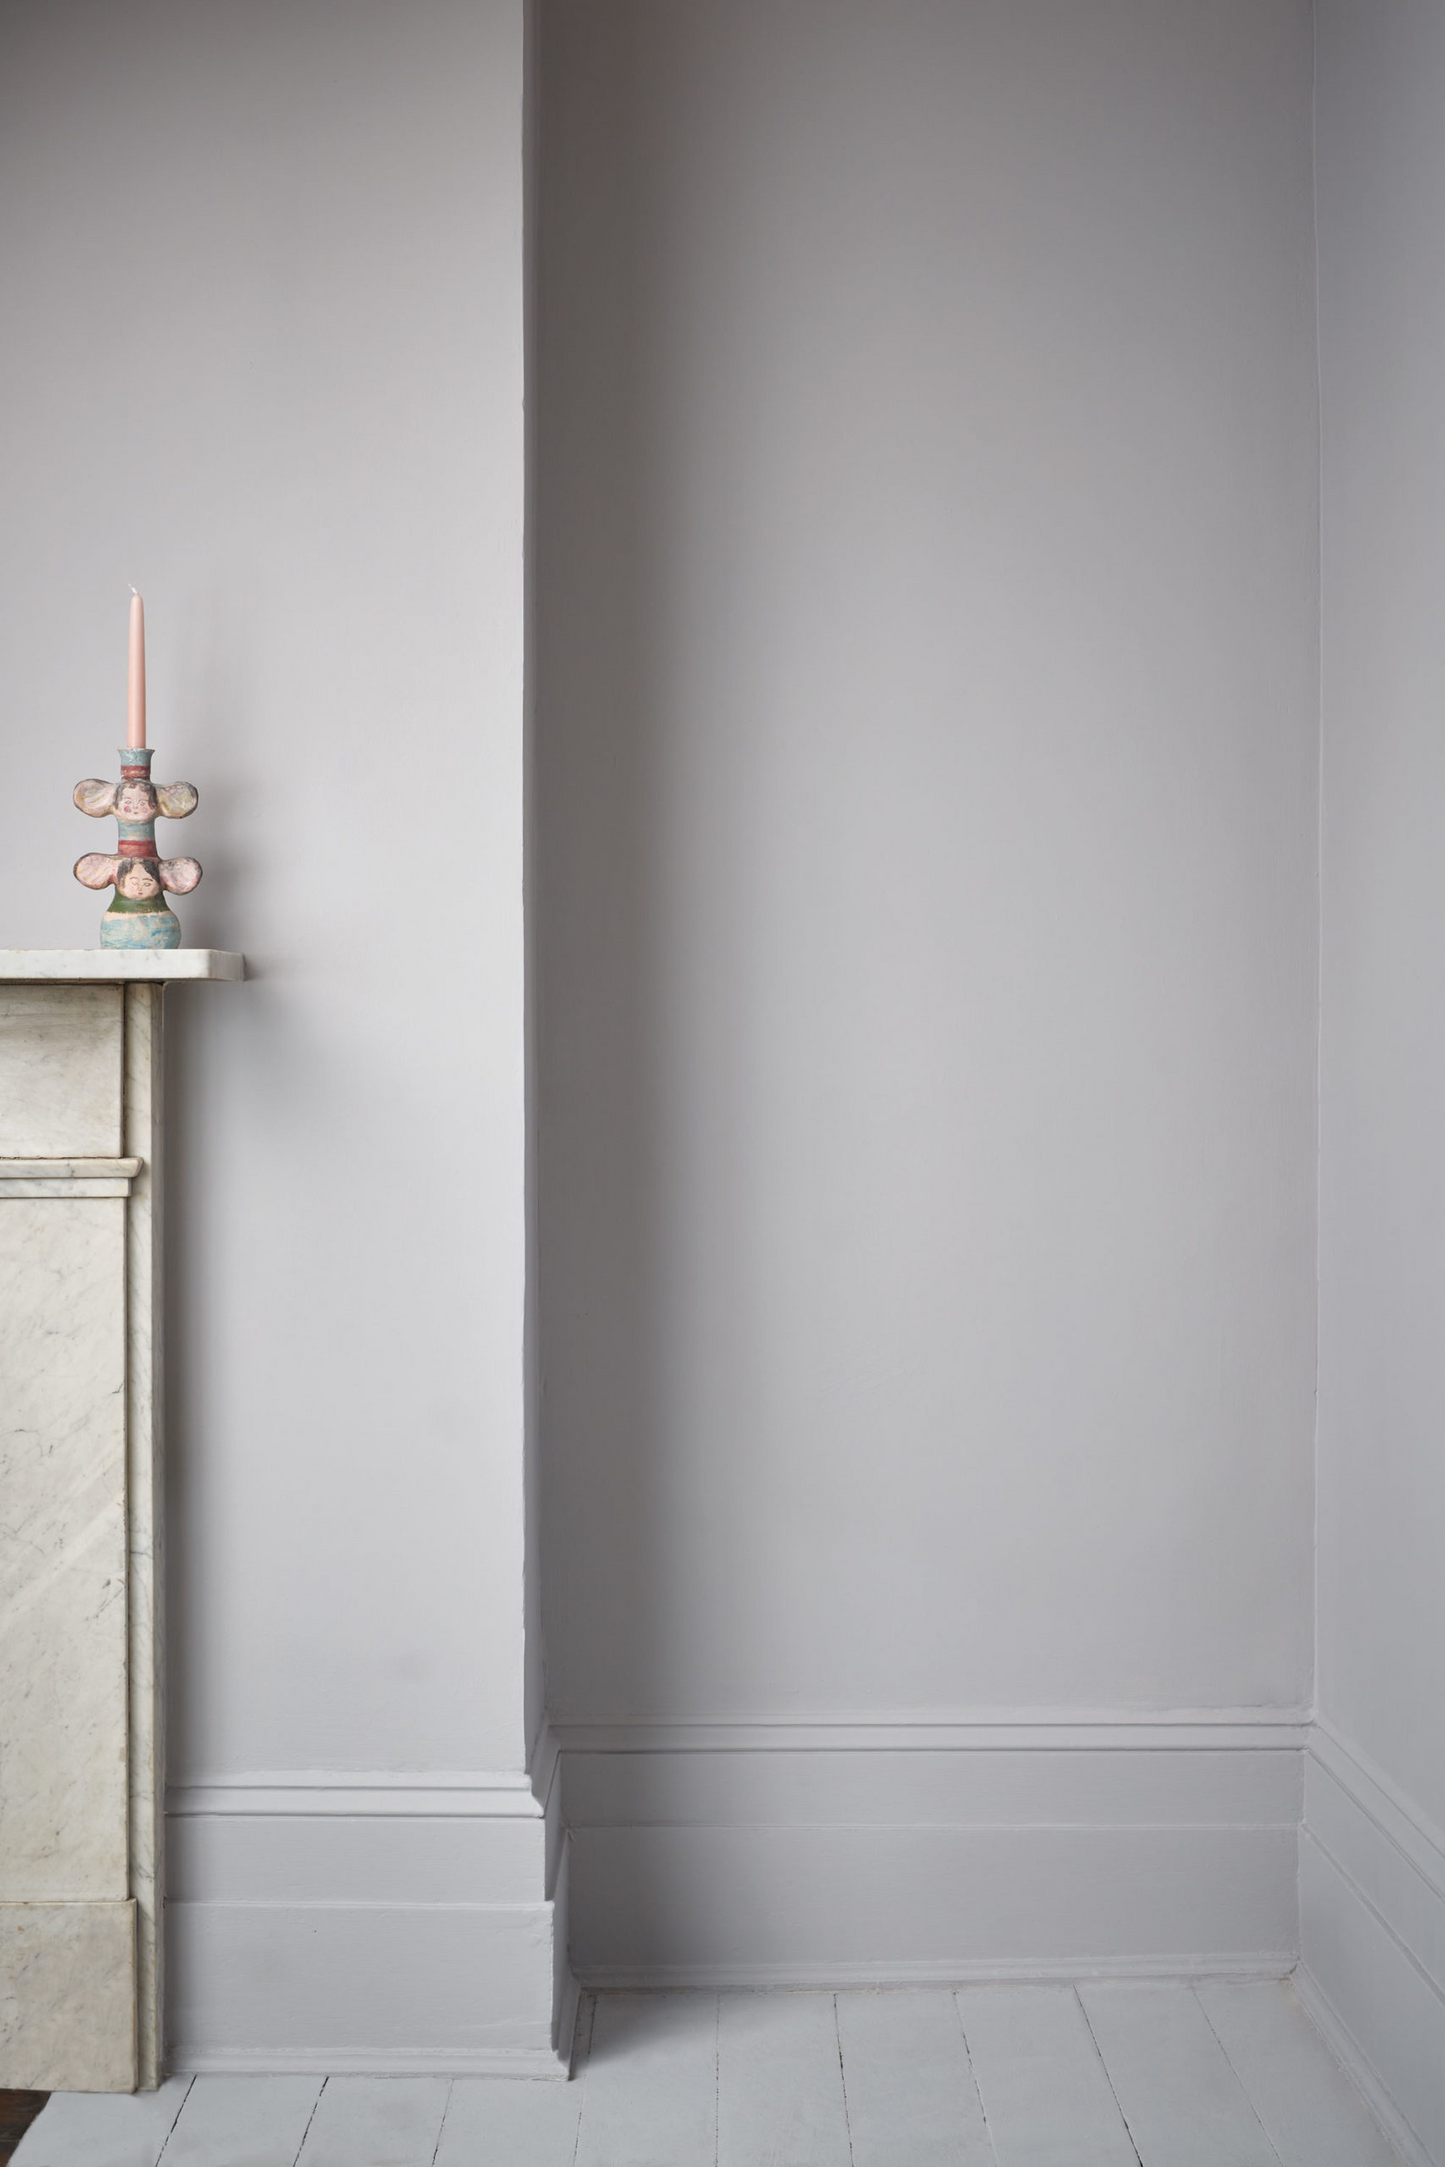 Annie Sloan Wall Paint - Chicago Gray